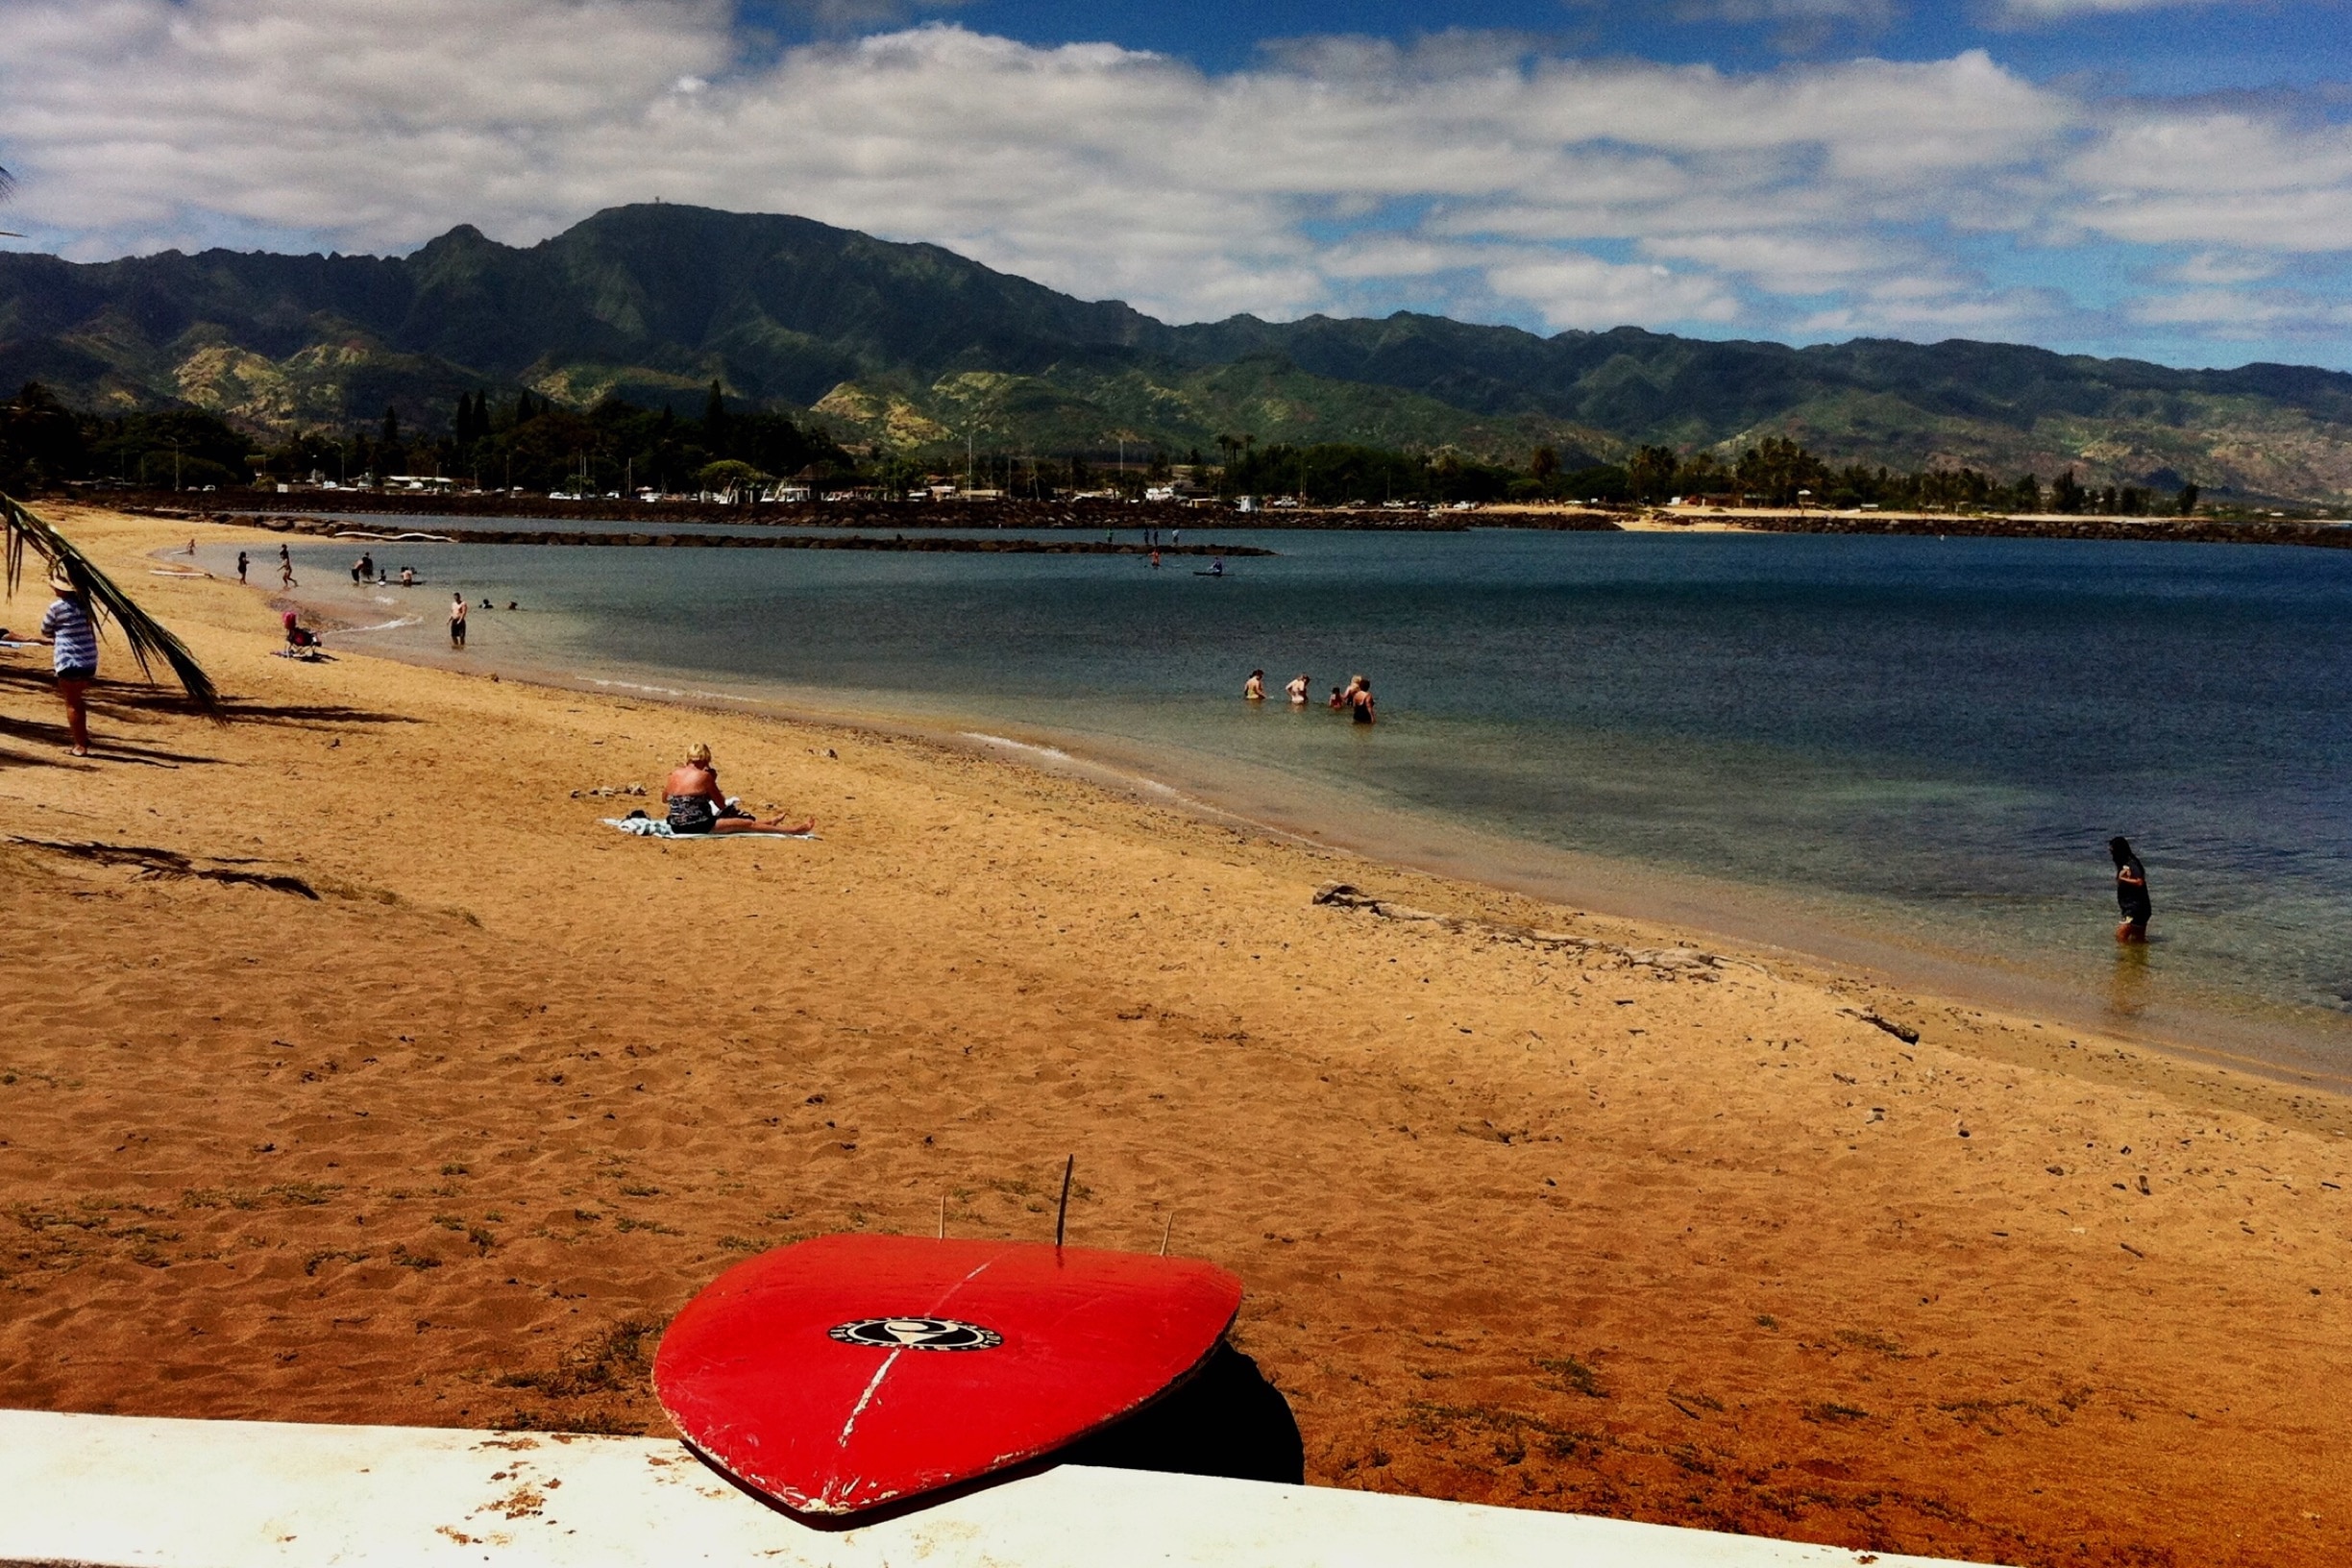 The colorful beaches of Oahu are amazing!
#EndlessSummer